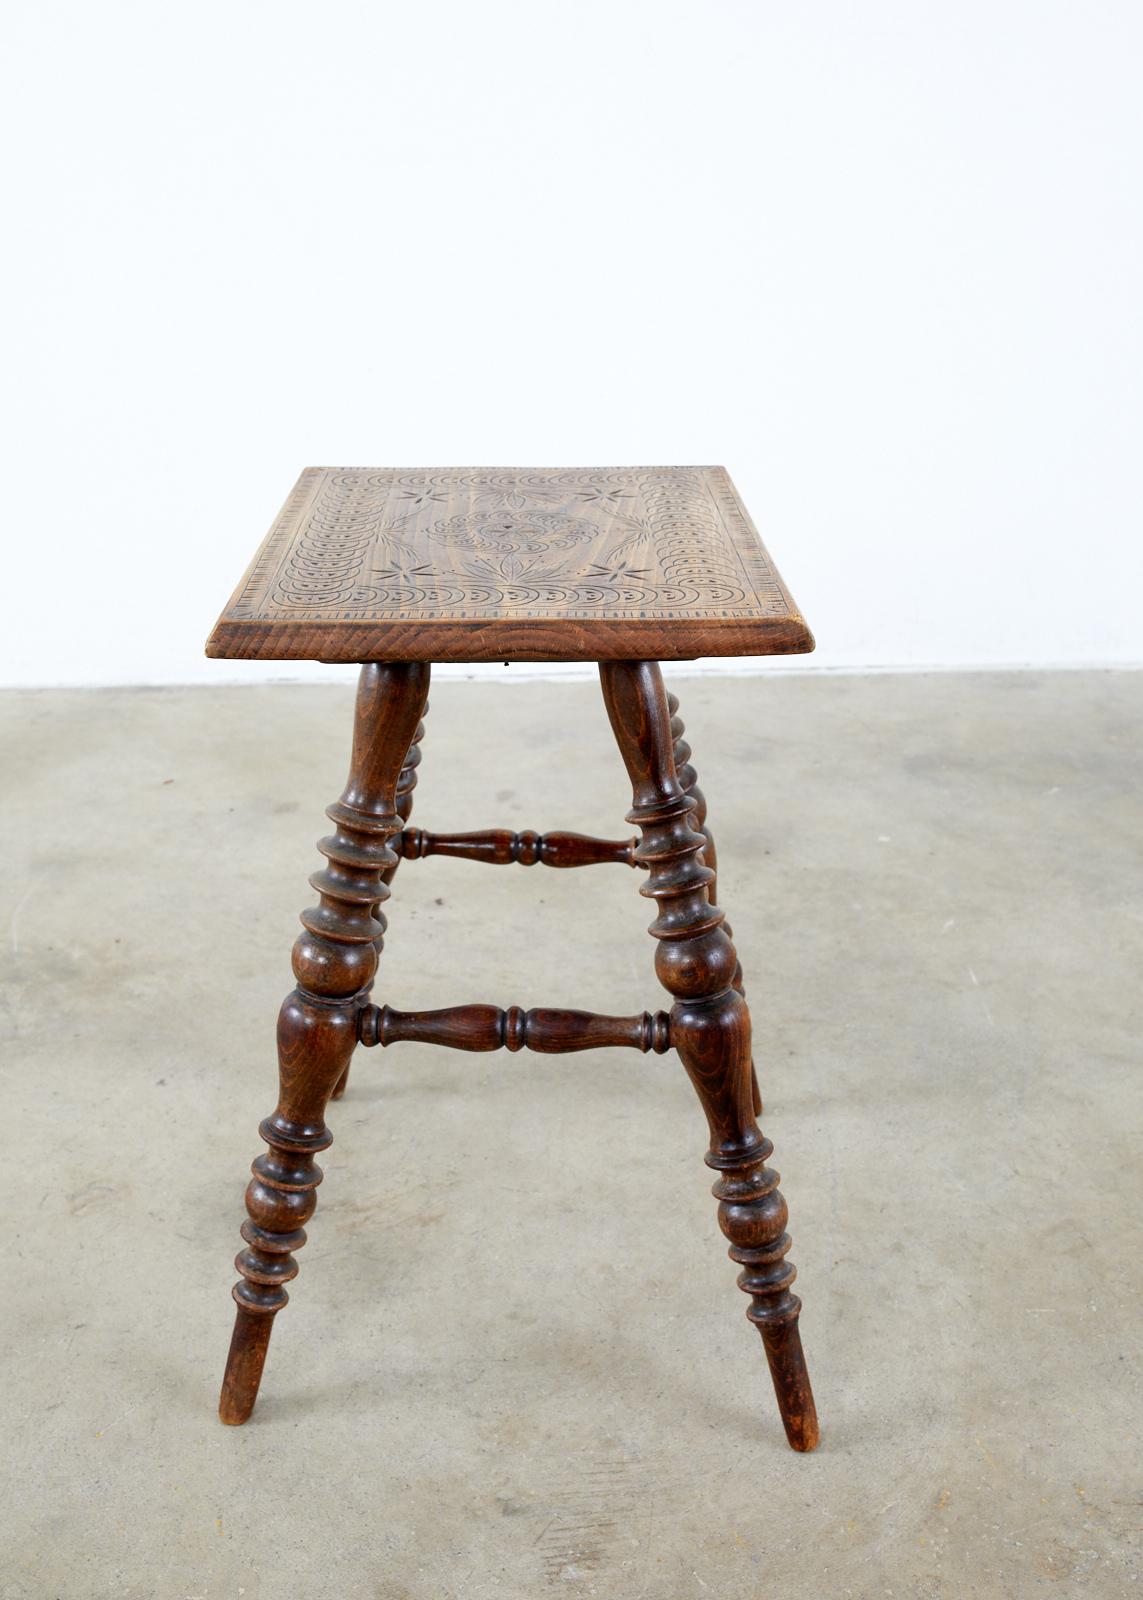 Rustic American Wooden Stool or Drinks Table 1